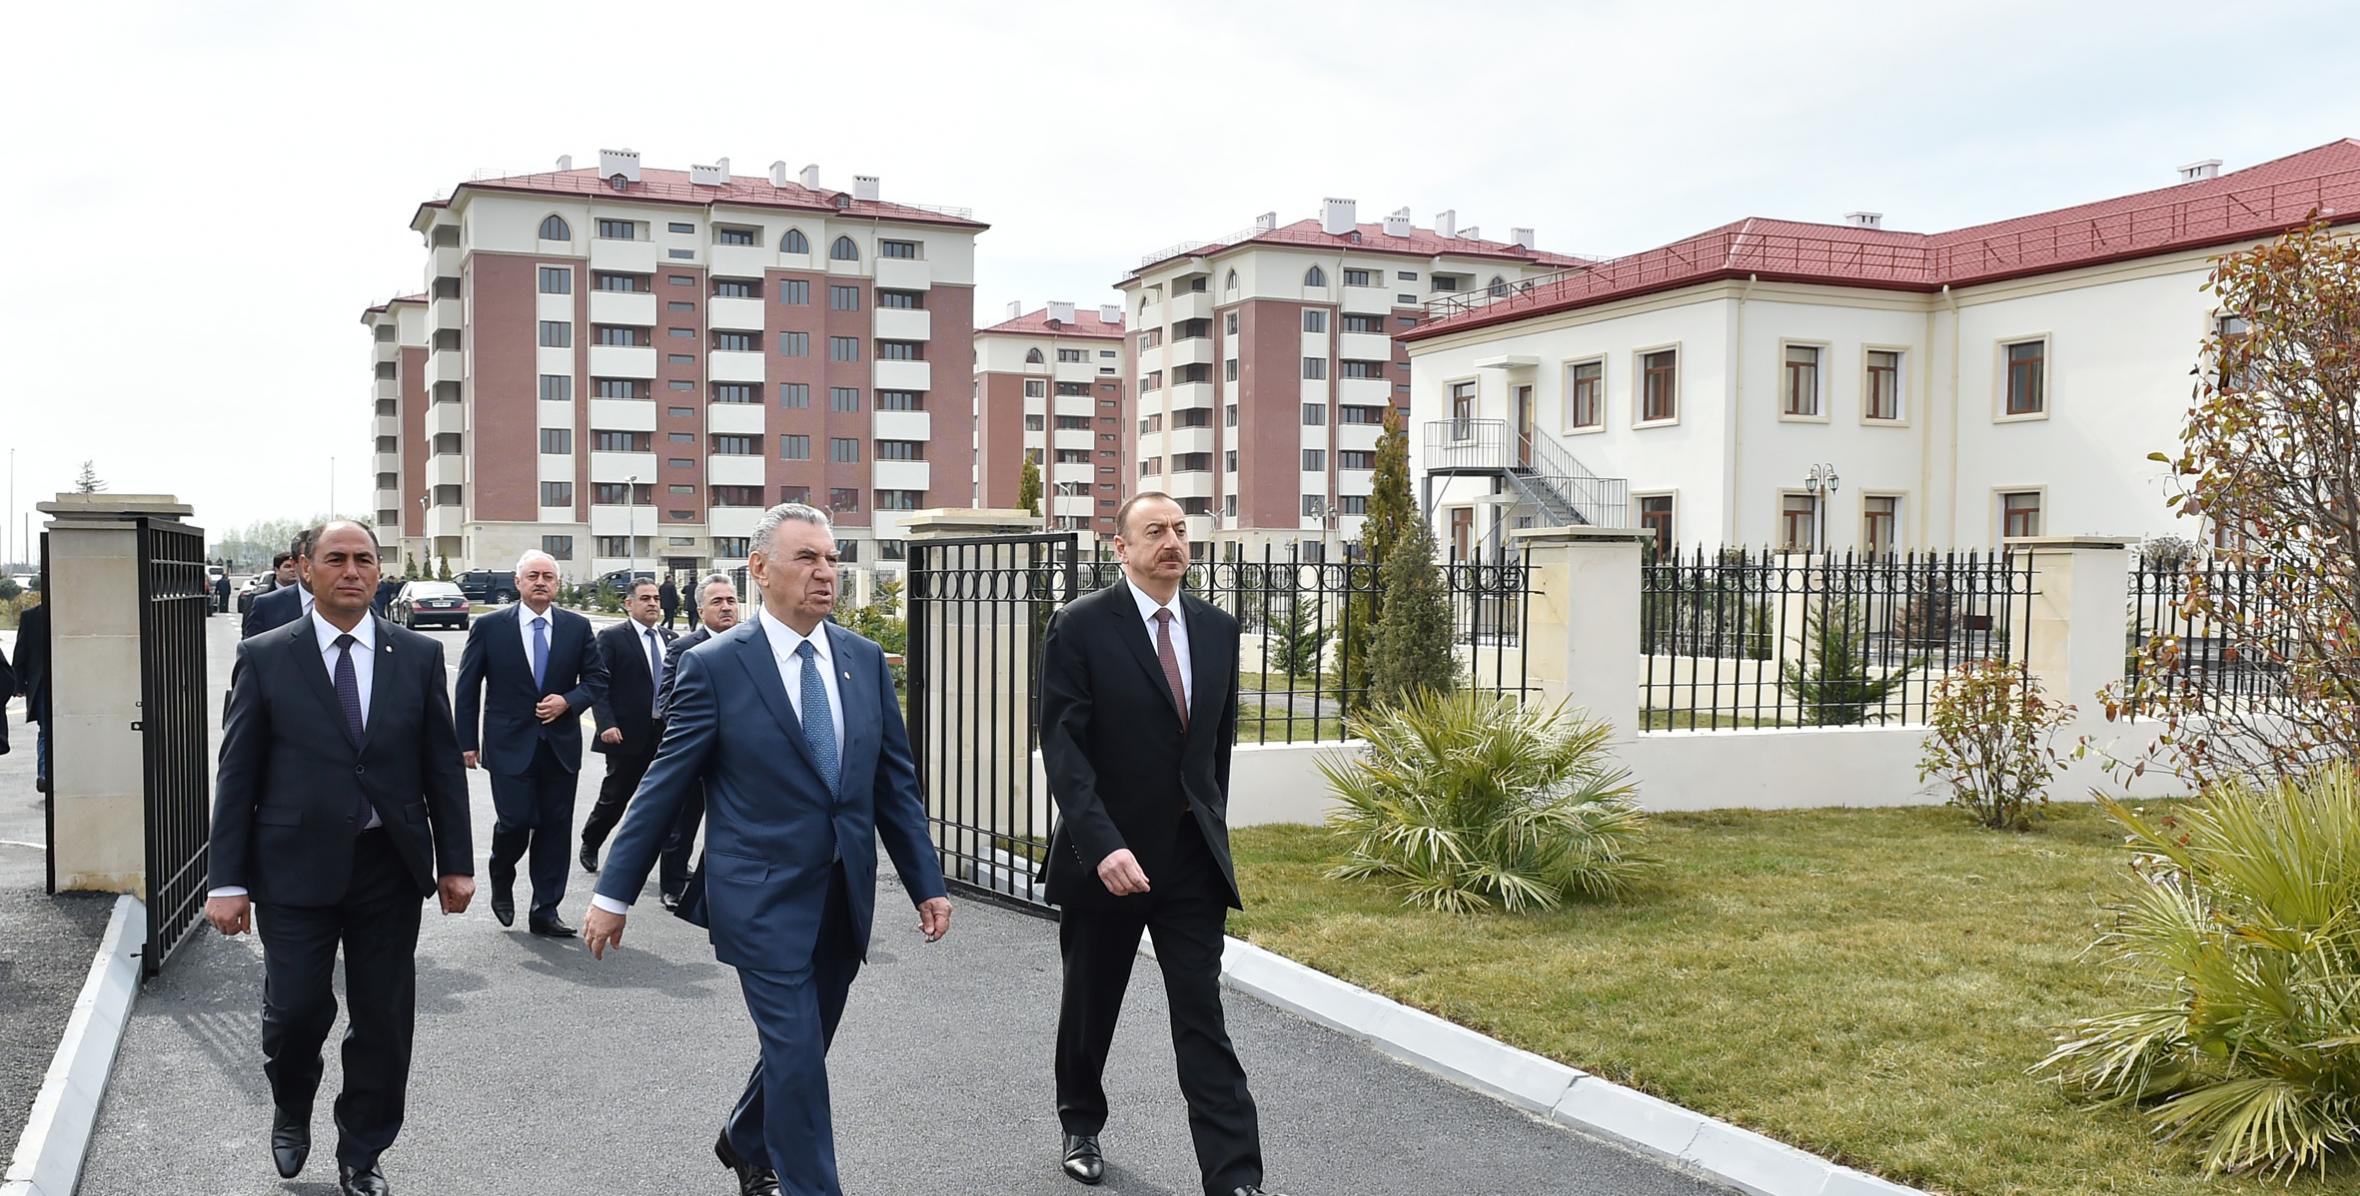 Ilham Aliyev reviewed a newly-built residential complex for 588 IDP families in Barda